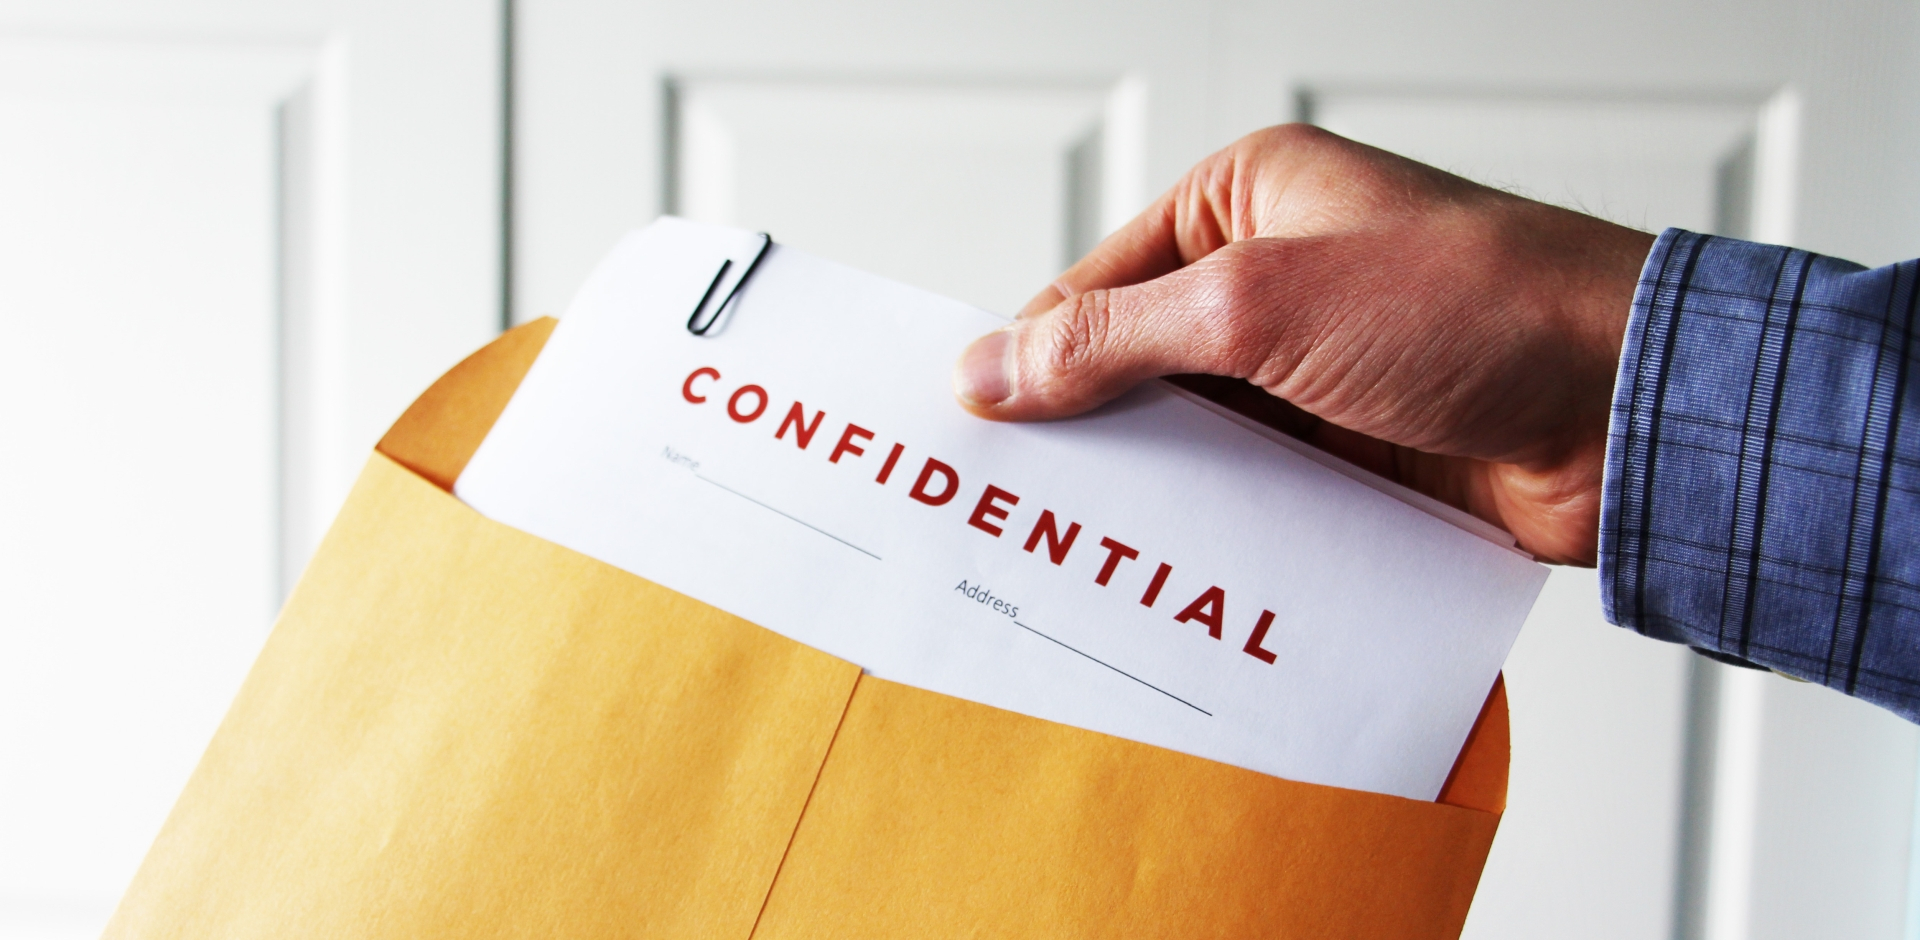 Phi Confidentiality Agreement Phipa And Confidentiality Iionit